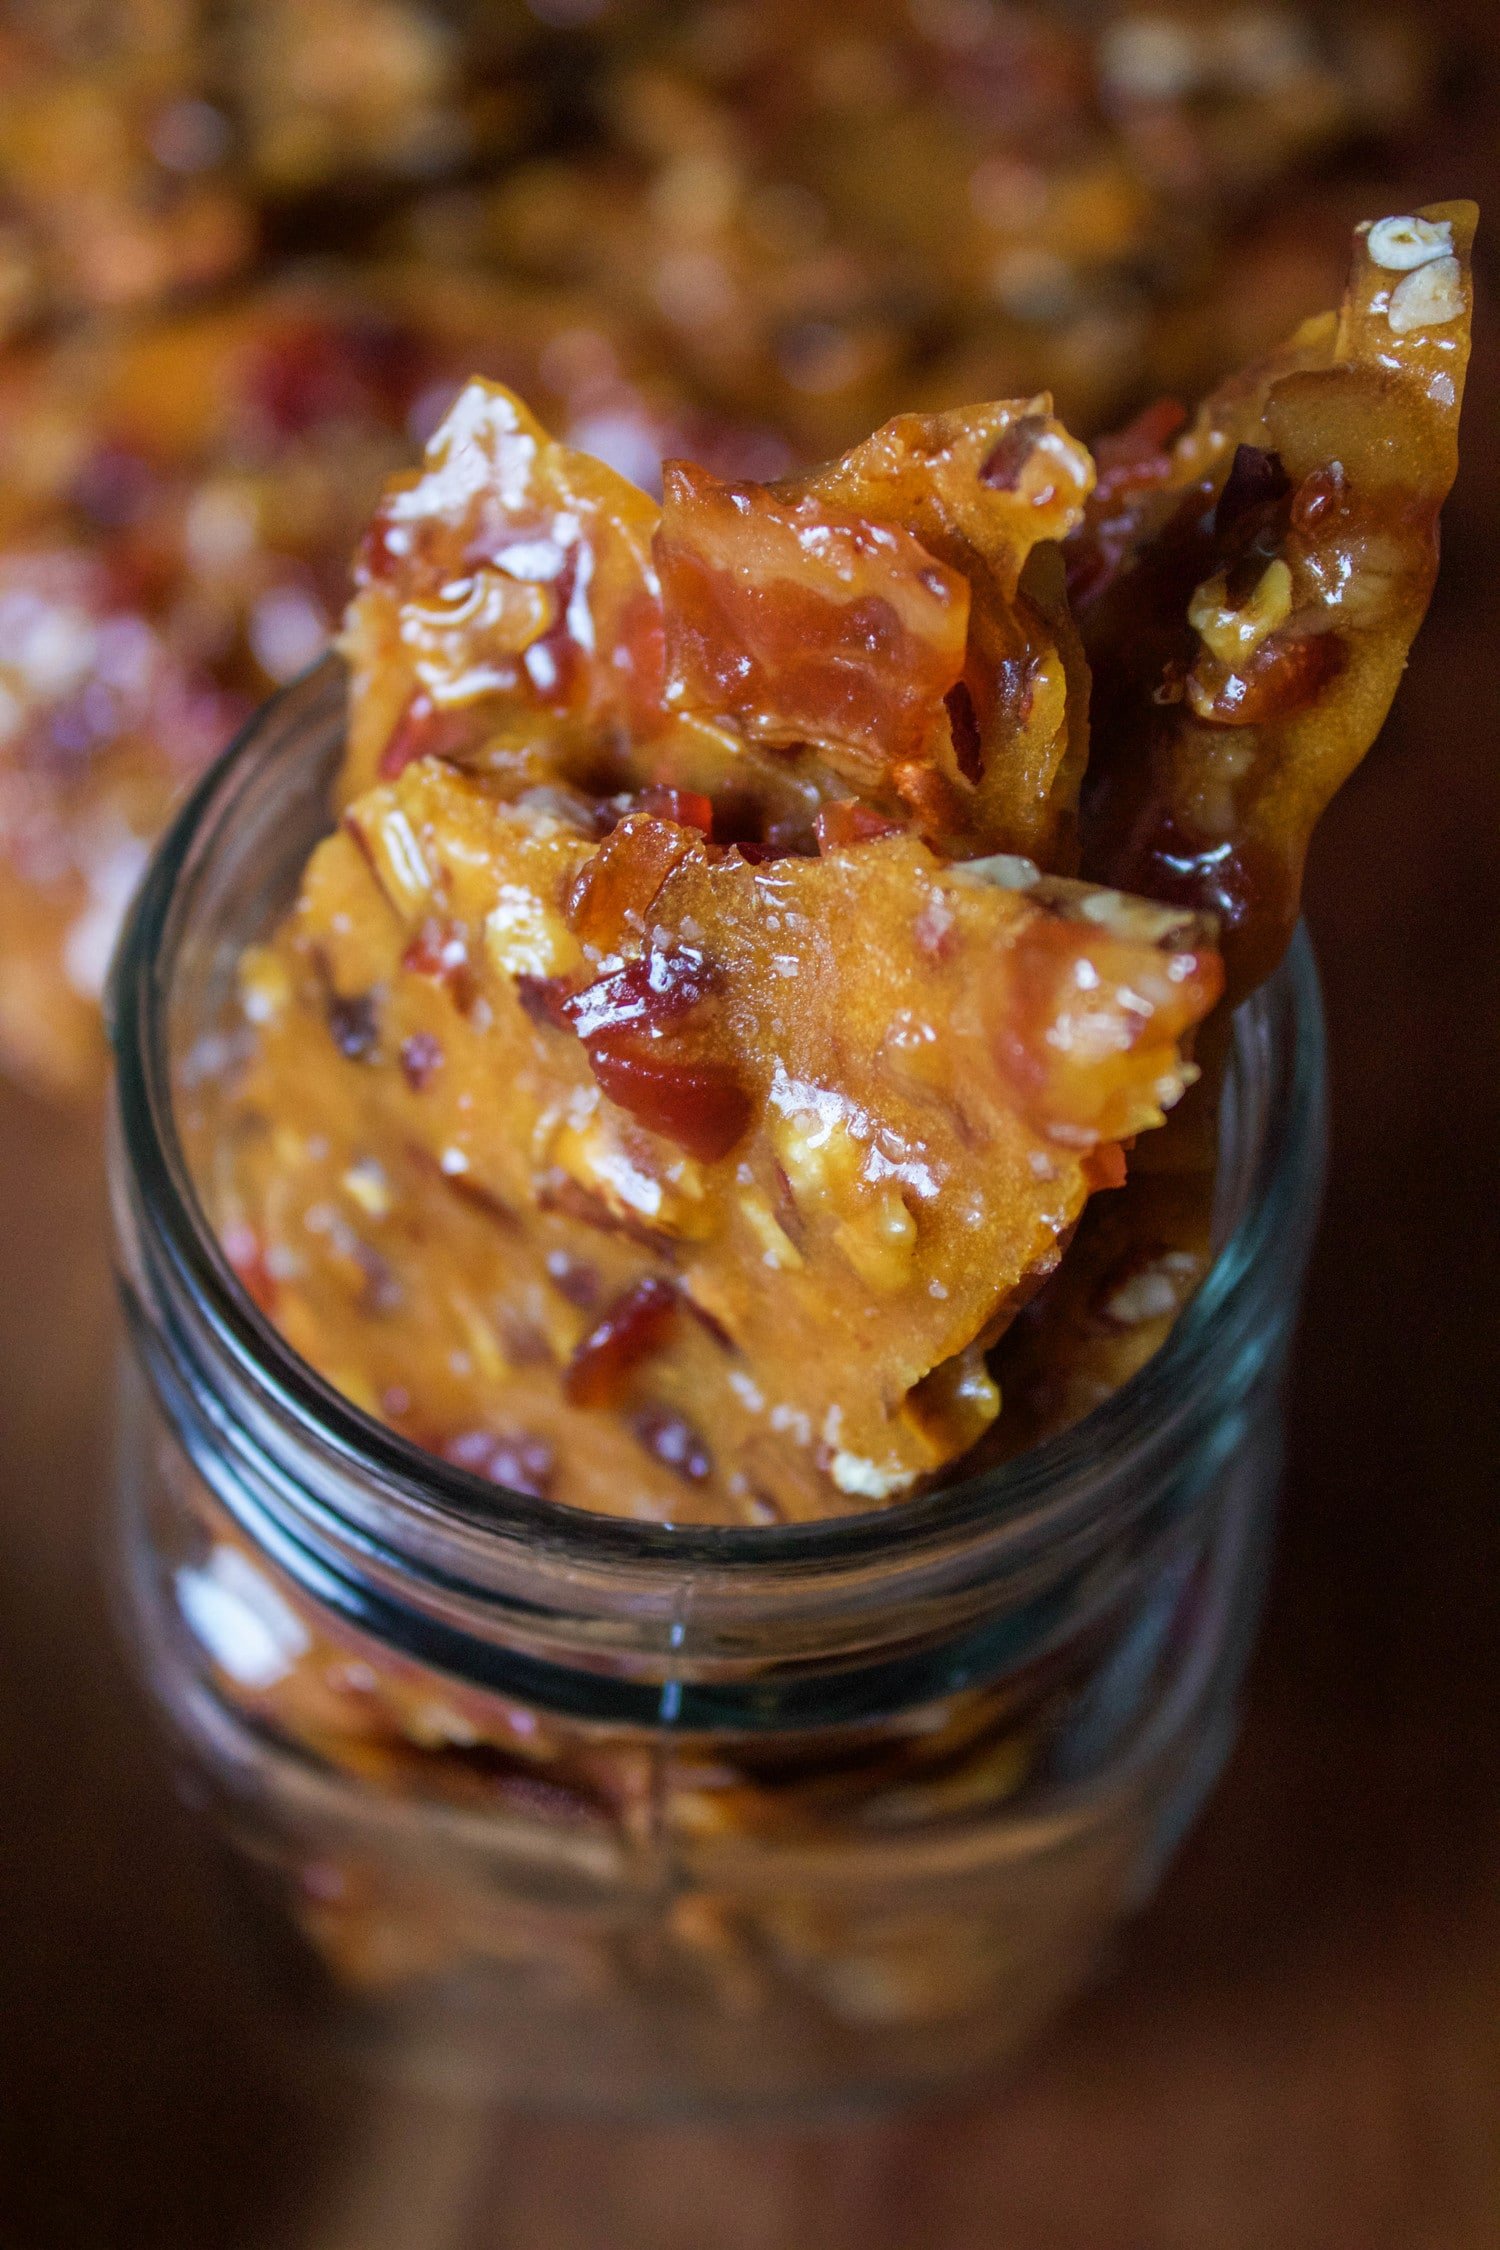 This bourbon bacon brittle is made with candied bacon, toasted pecans and bourbon. It's the crunchiest, most delicious brittle you will ever have.